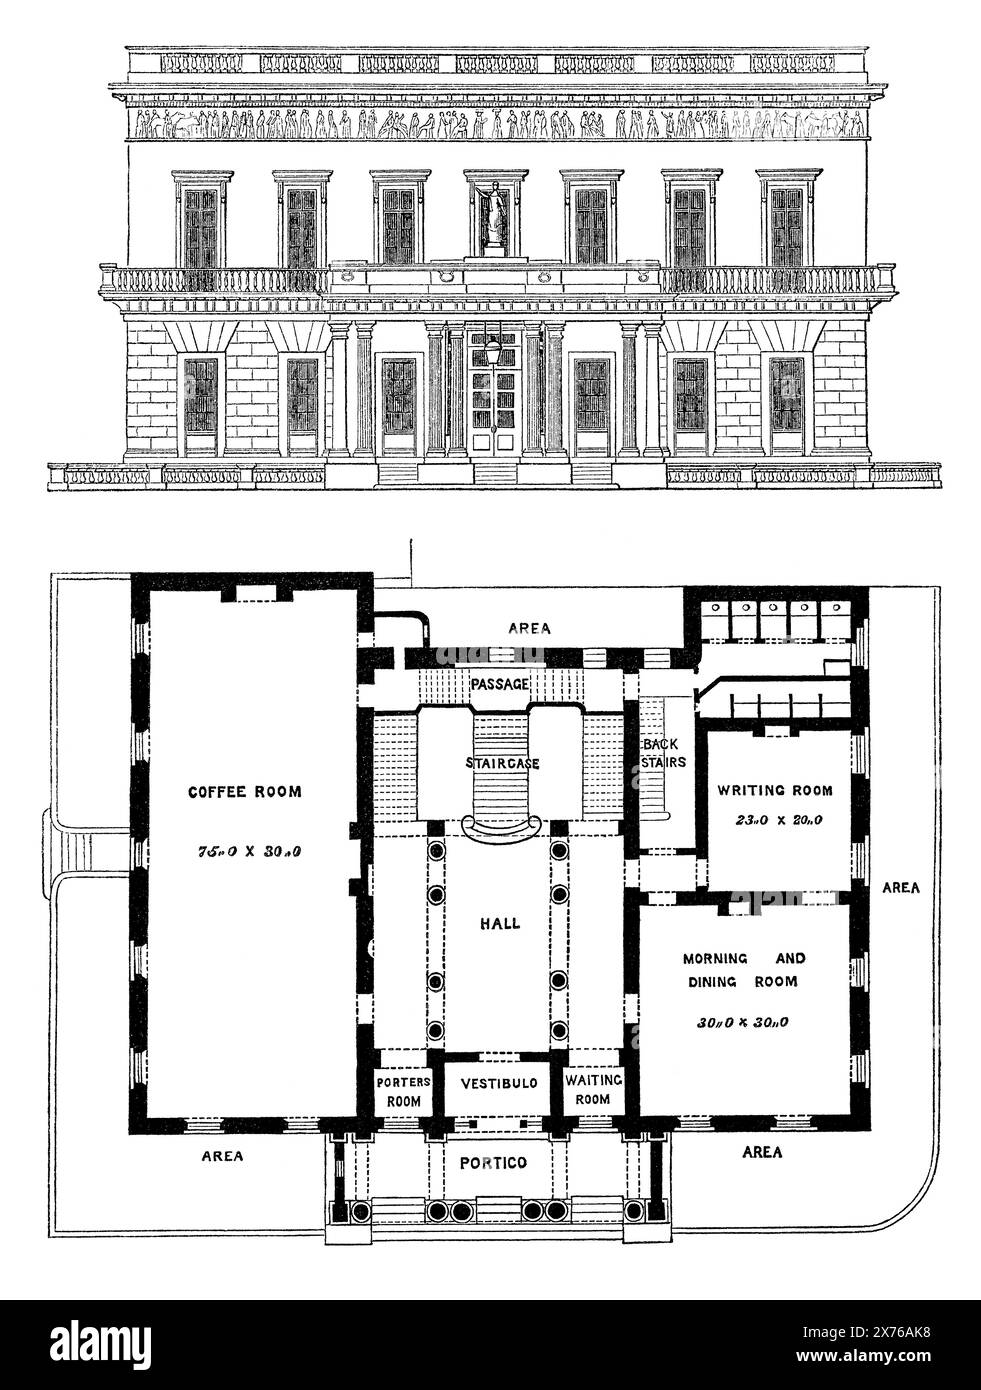 1854 vintage engraving of the Athanaeum Club in London, showing the front elevation and a ground floor plan. Designed by Decimus Burton. Stock Photo